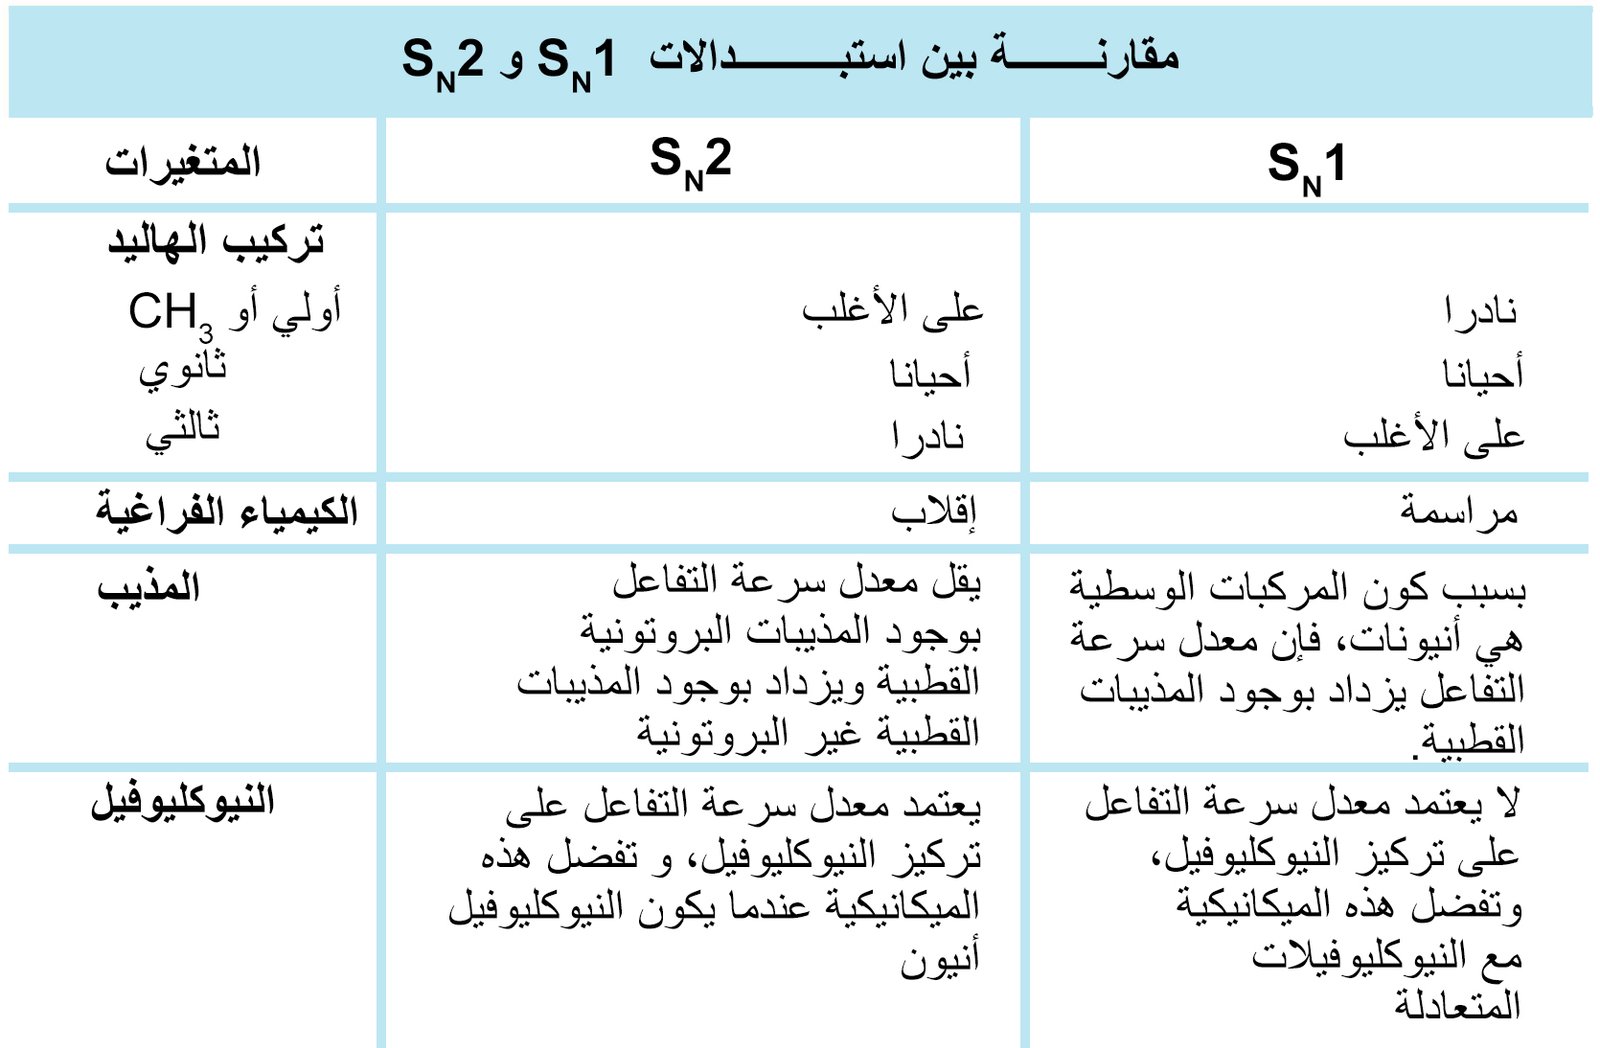 Table 6 2ش